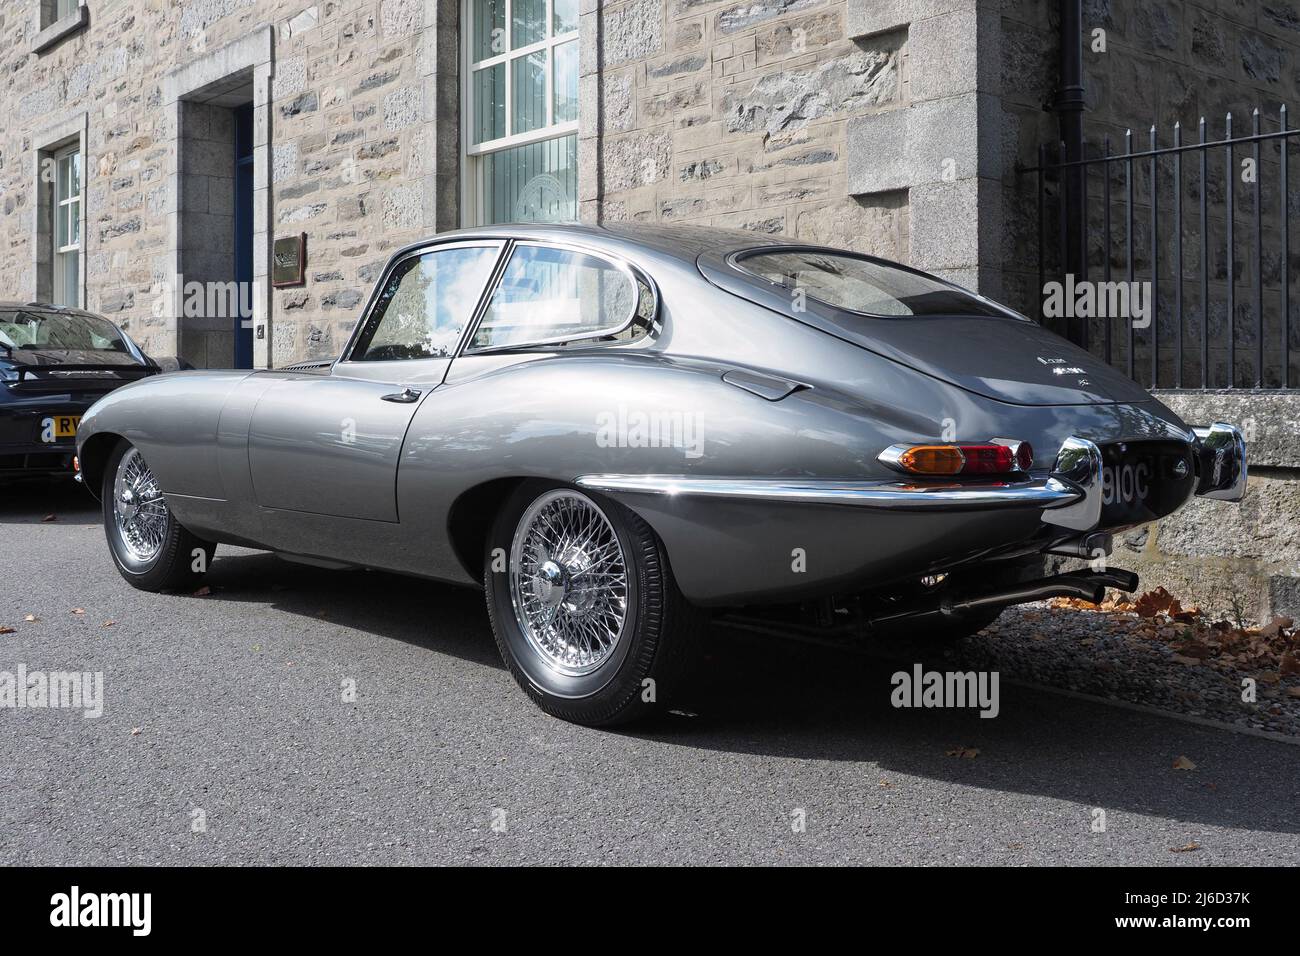 Rear view of a Jaguar E-Type, Series 1 coupe, with a straight six 4.2lt engine, in metallic pearl grey silver. Parked next to old stone building. Stock Photo